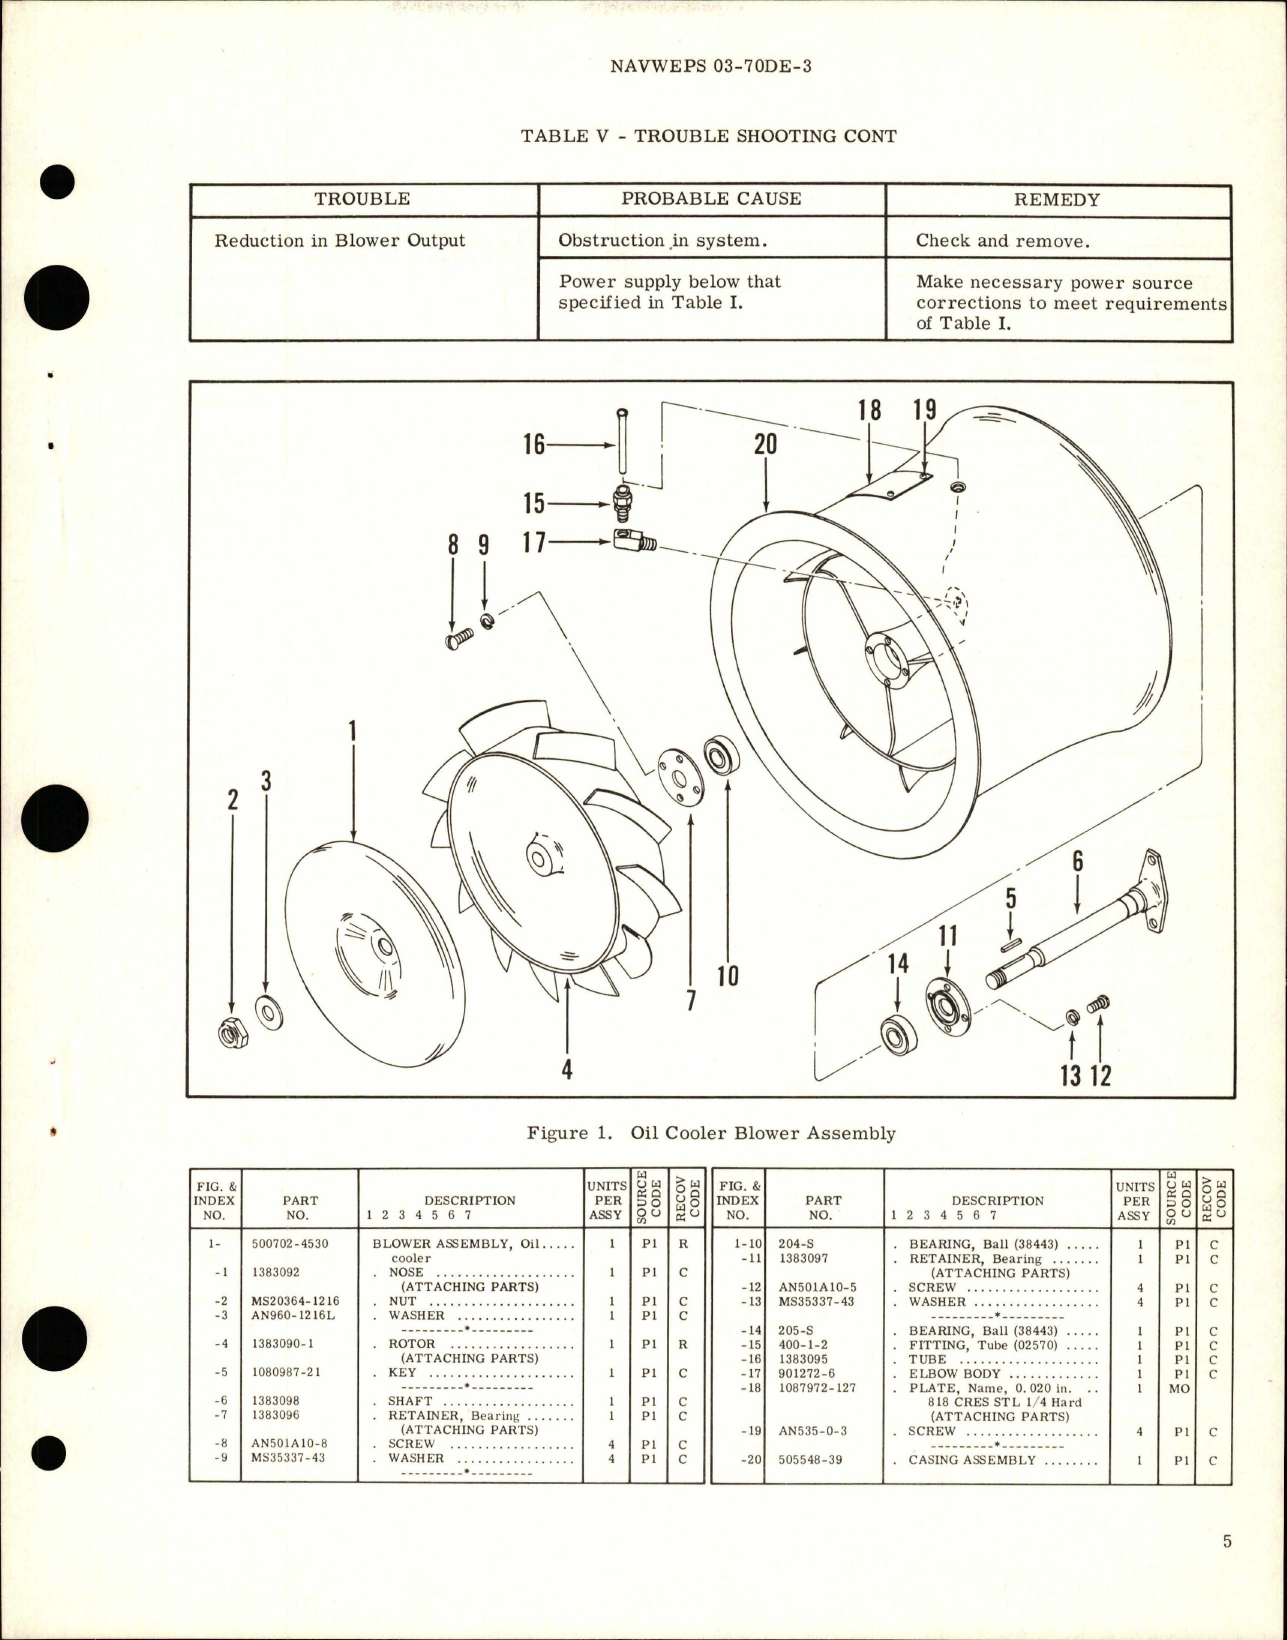 Sample page 5 from AirCorps Library document: Overhaul Instructions with Parts Breakdown for Oil Cooler Blower Assembly - Part 500702-4530 